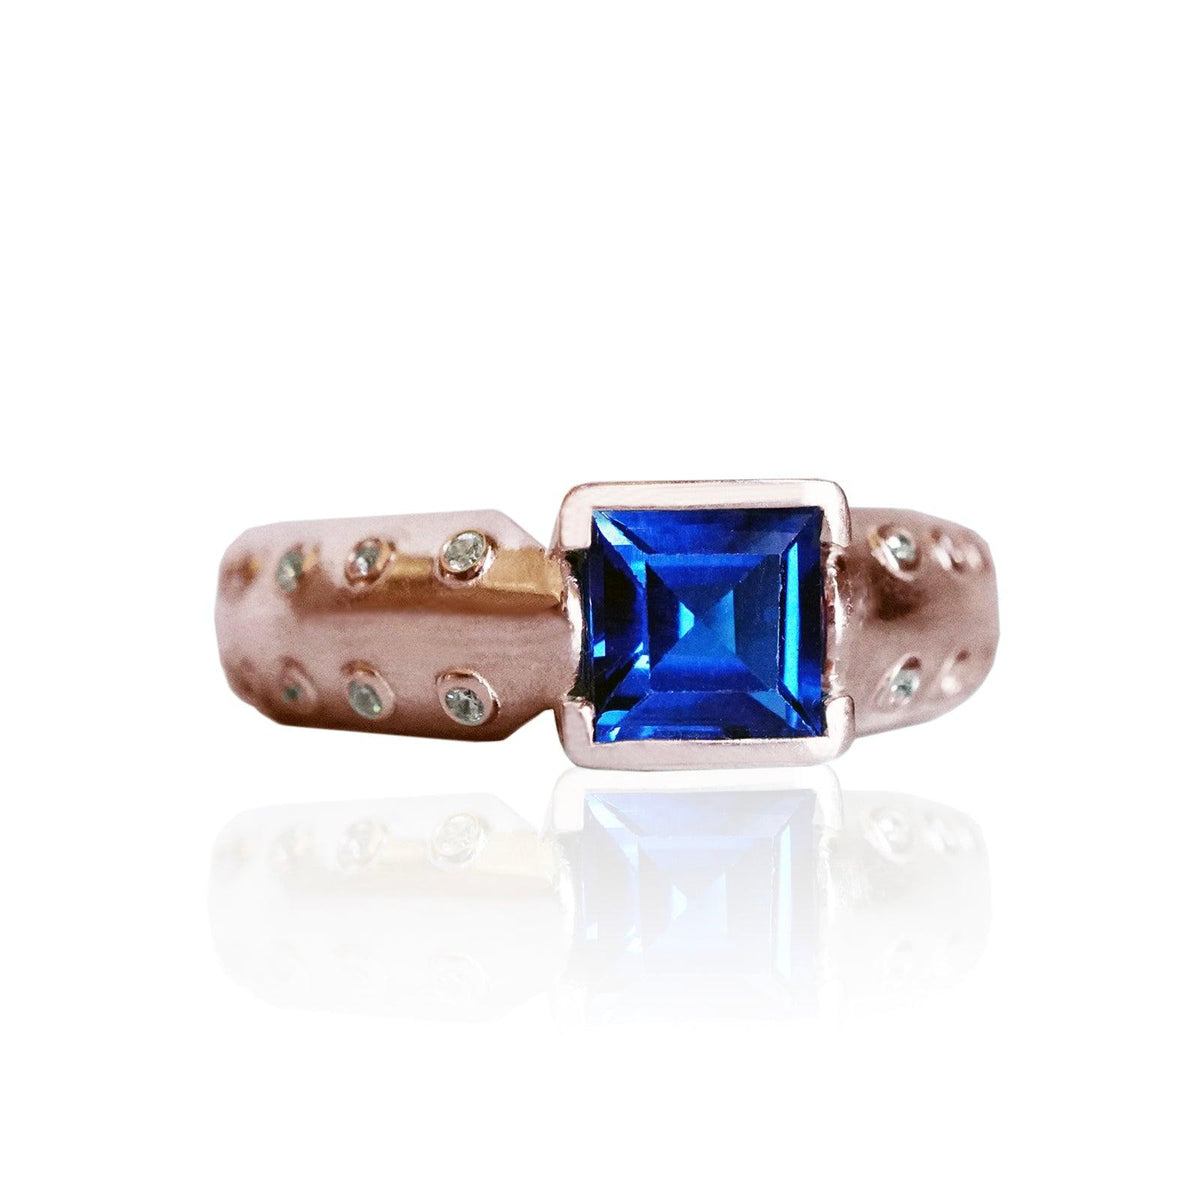 Paragon Blue Sapphire Diamond Ring in Sterling Silver and 14K Gold, 6mm